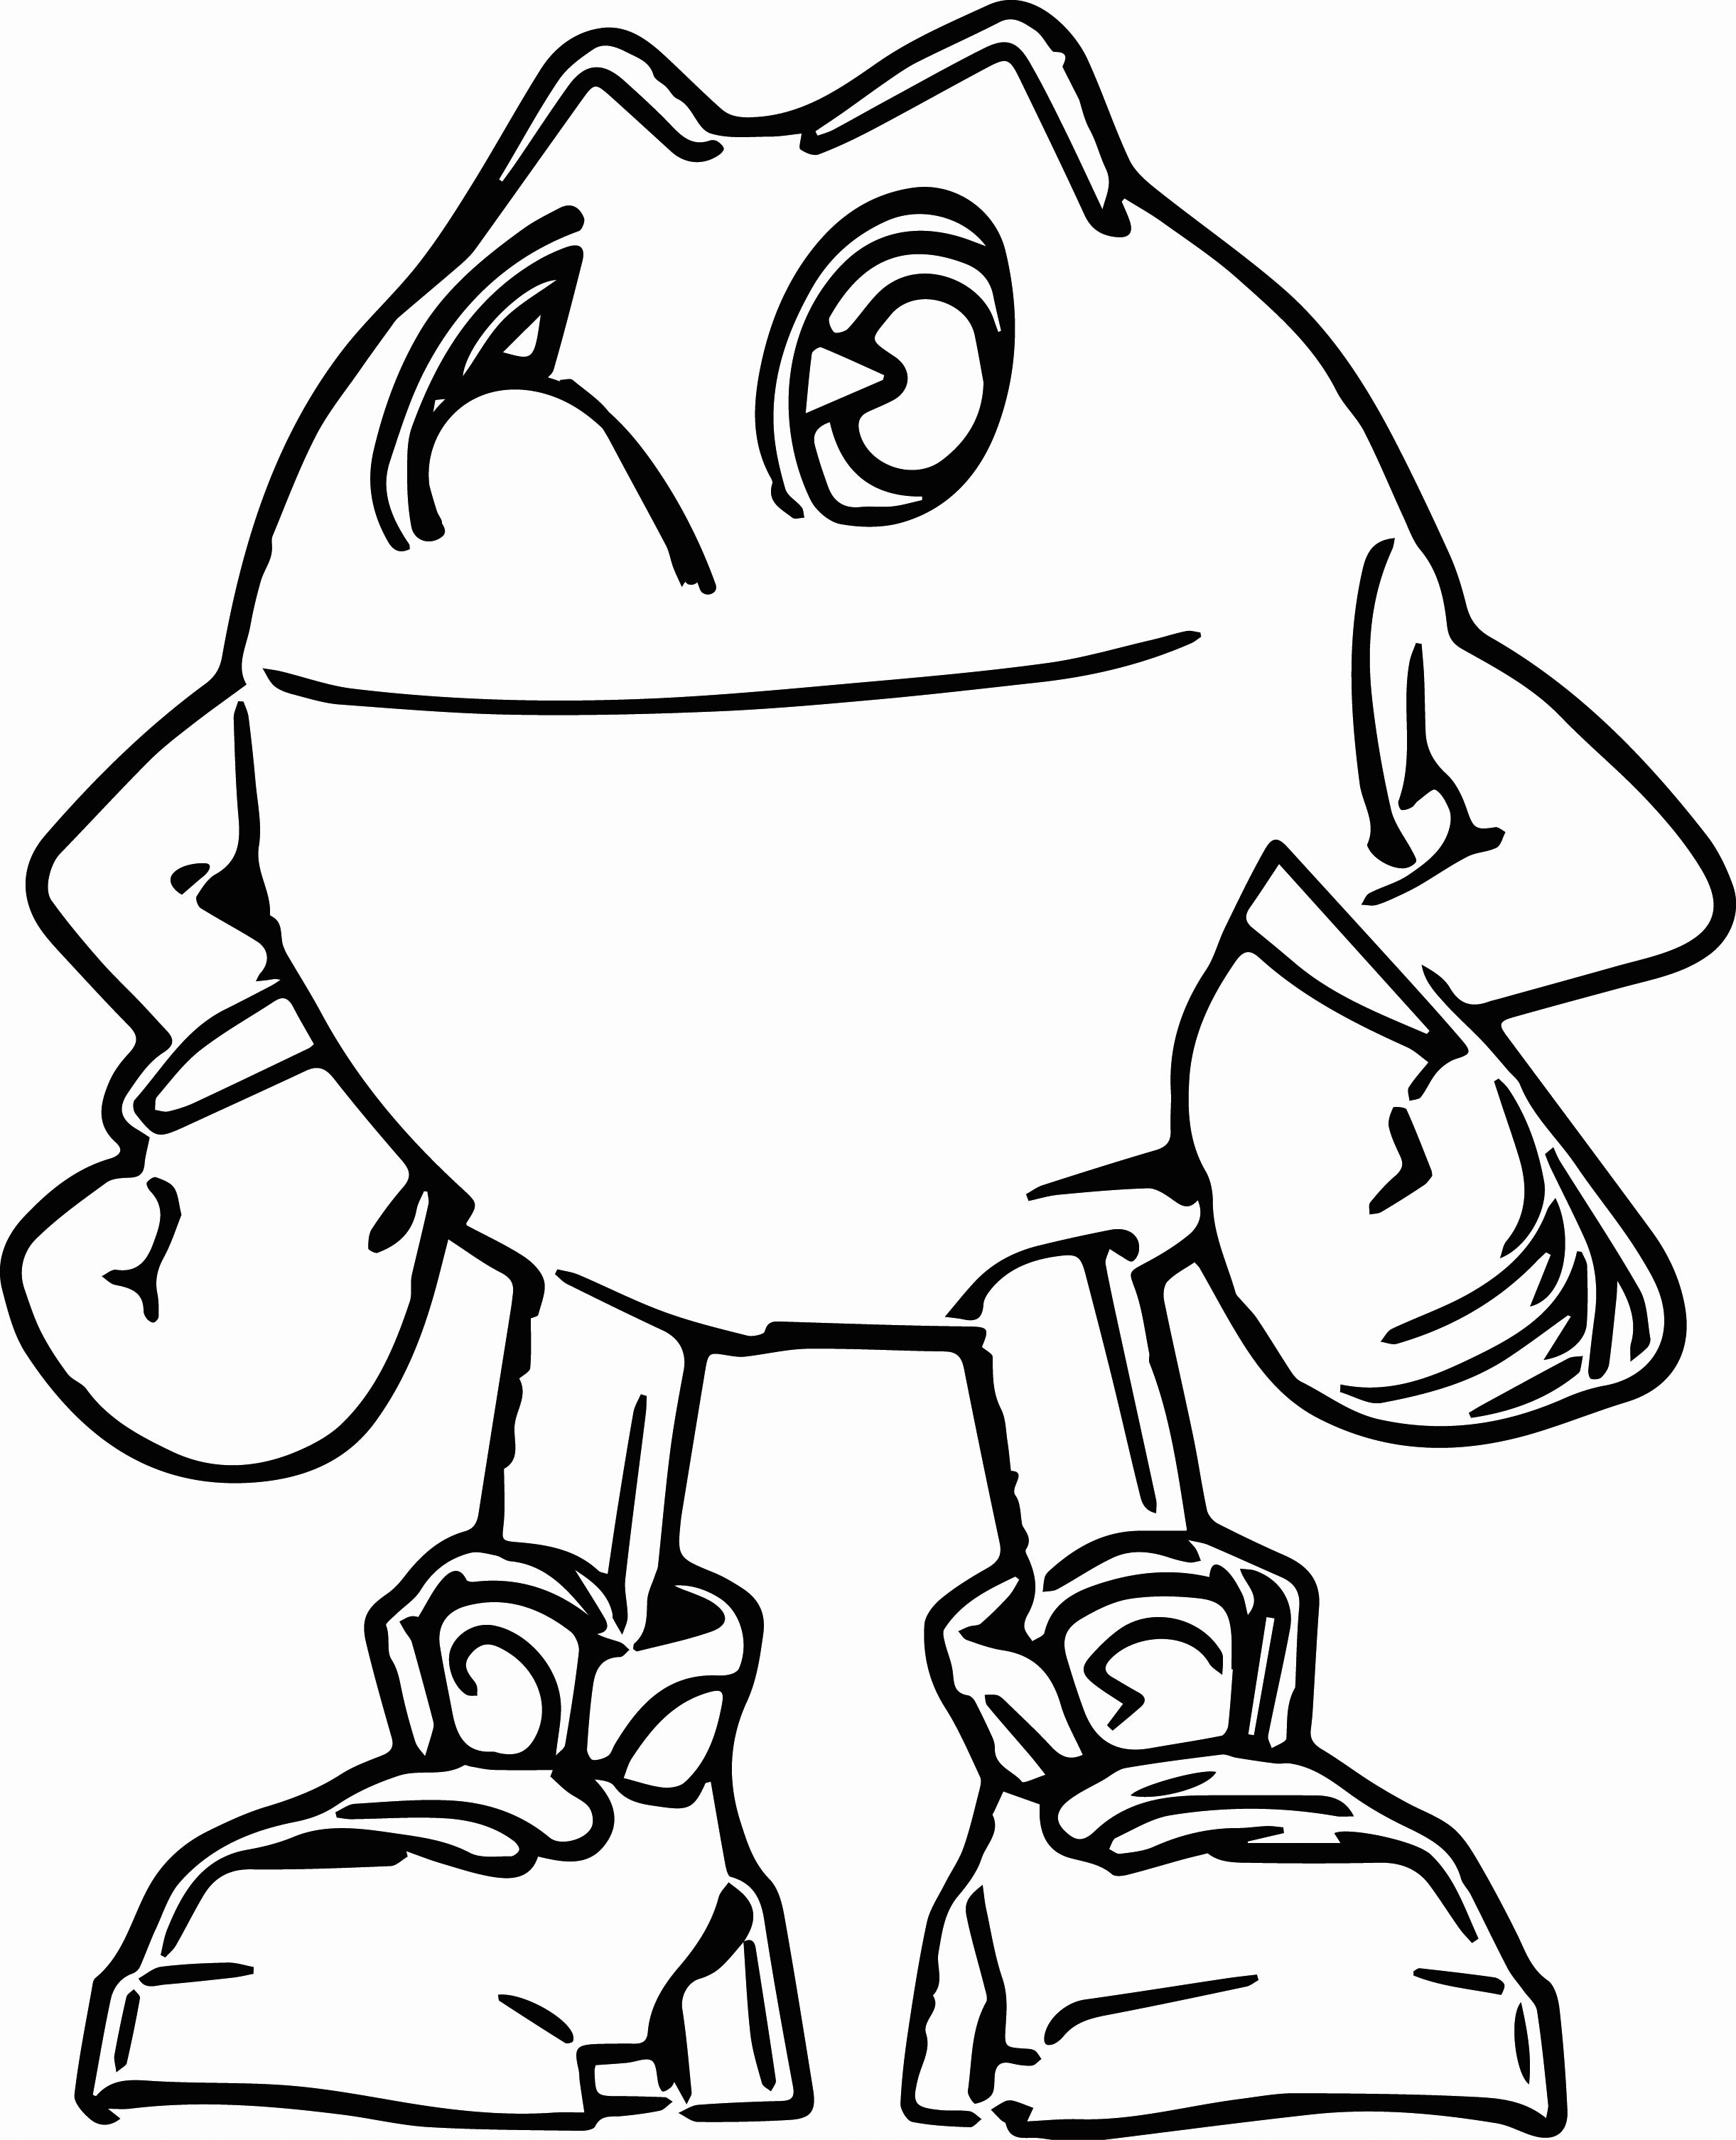 Pac-Man Coloring Pages - Best Coloring Pages For Kids